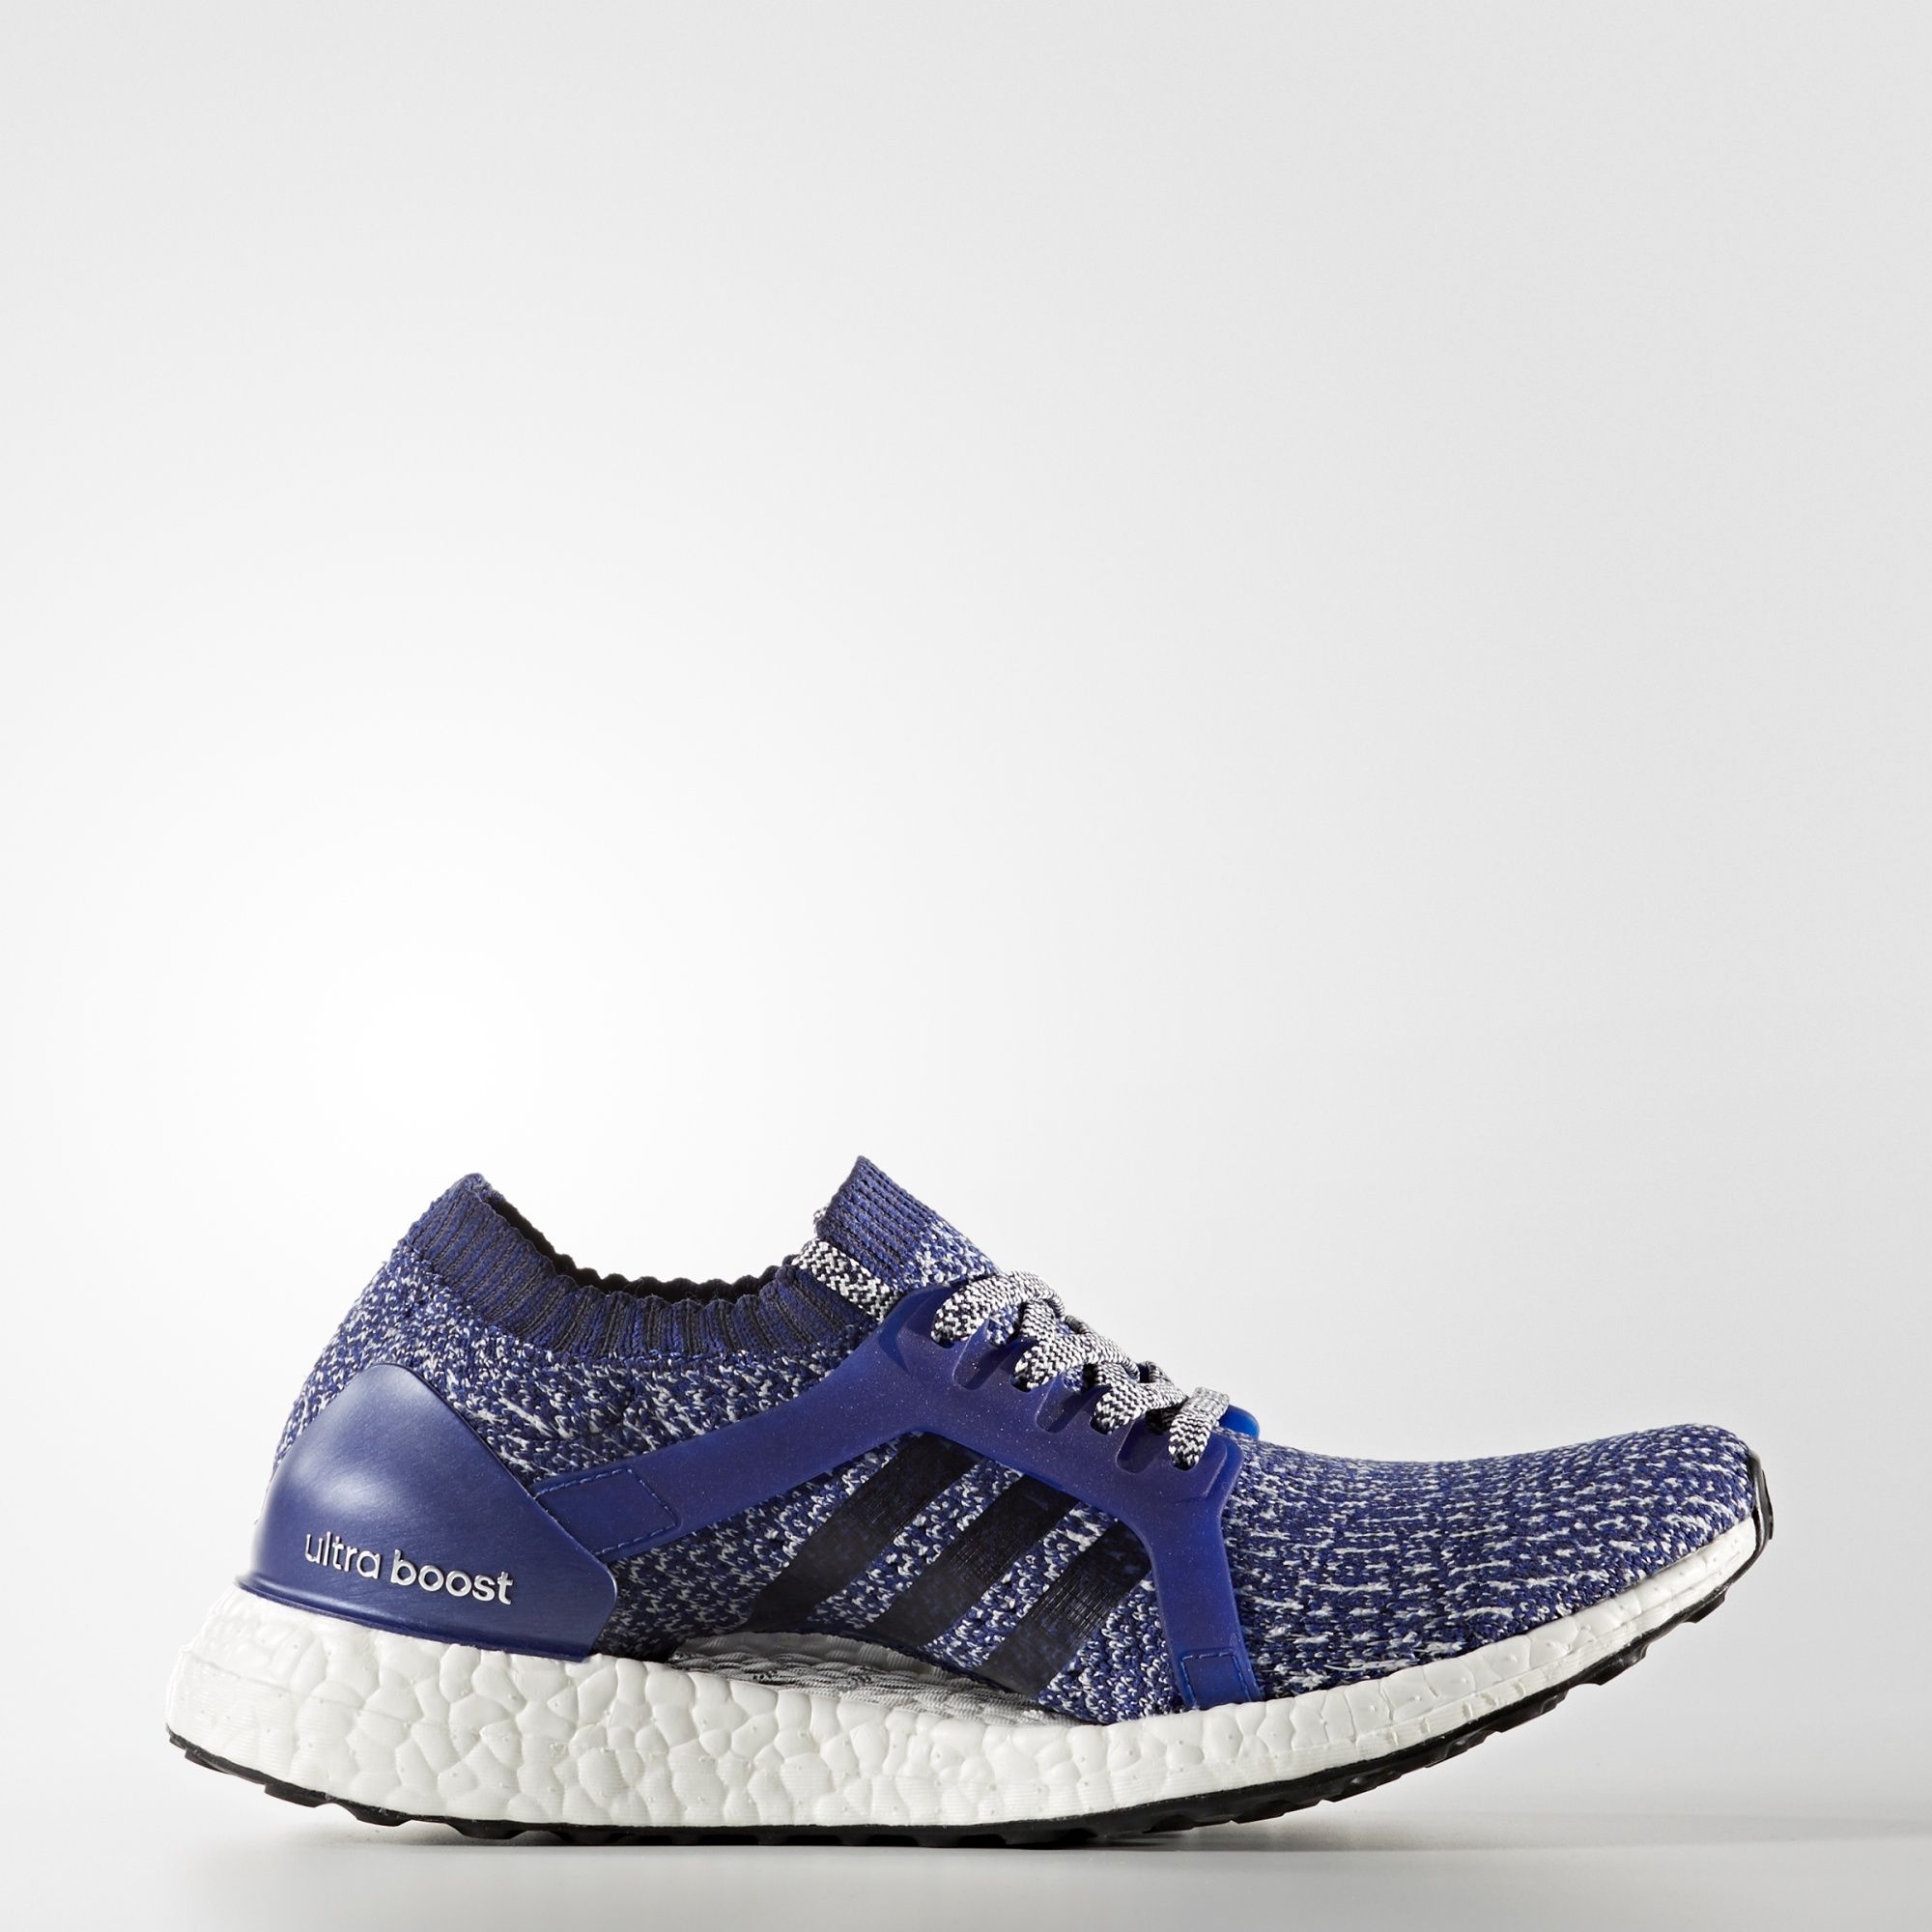 adidas-wmns-ultra-boost-x-parley-purple-mystery-ink-2